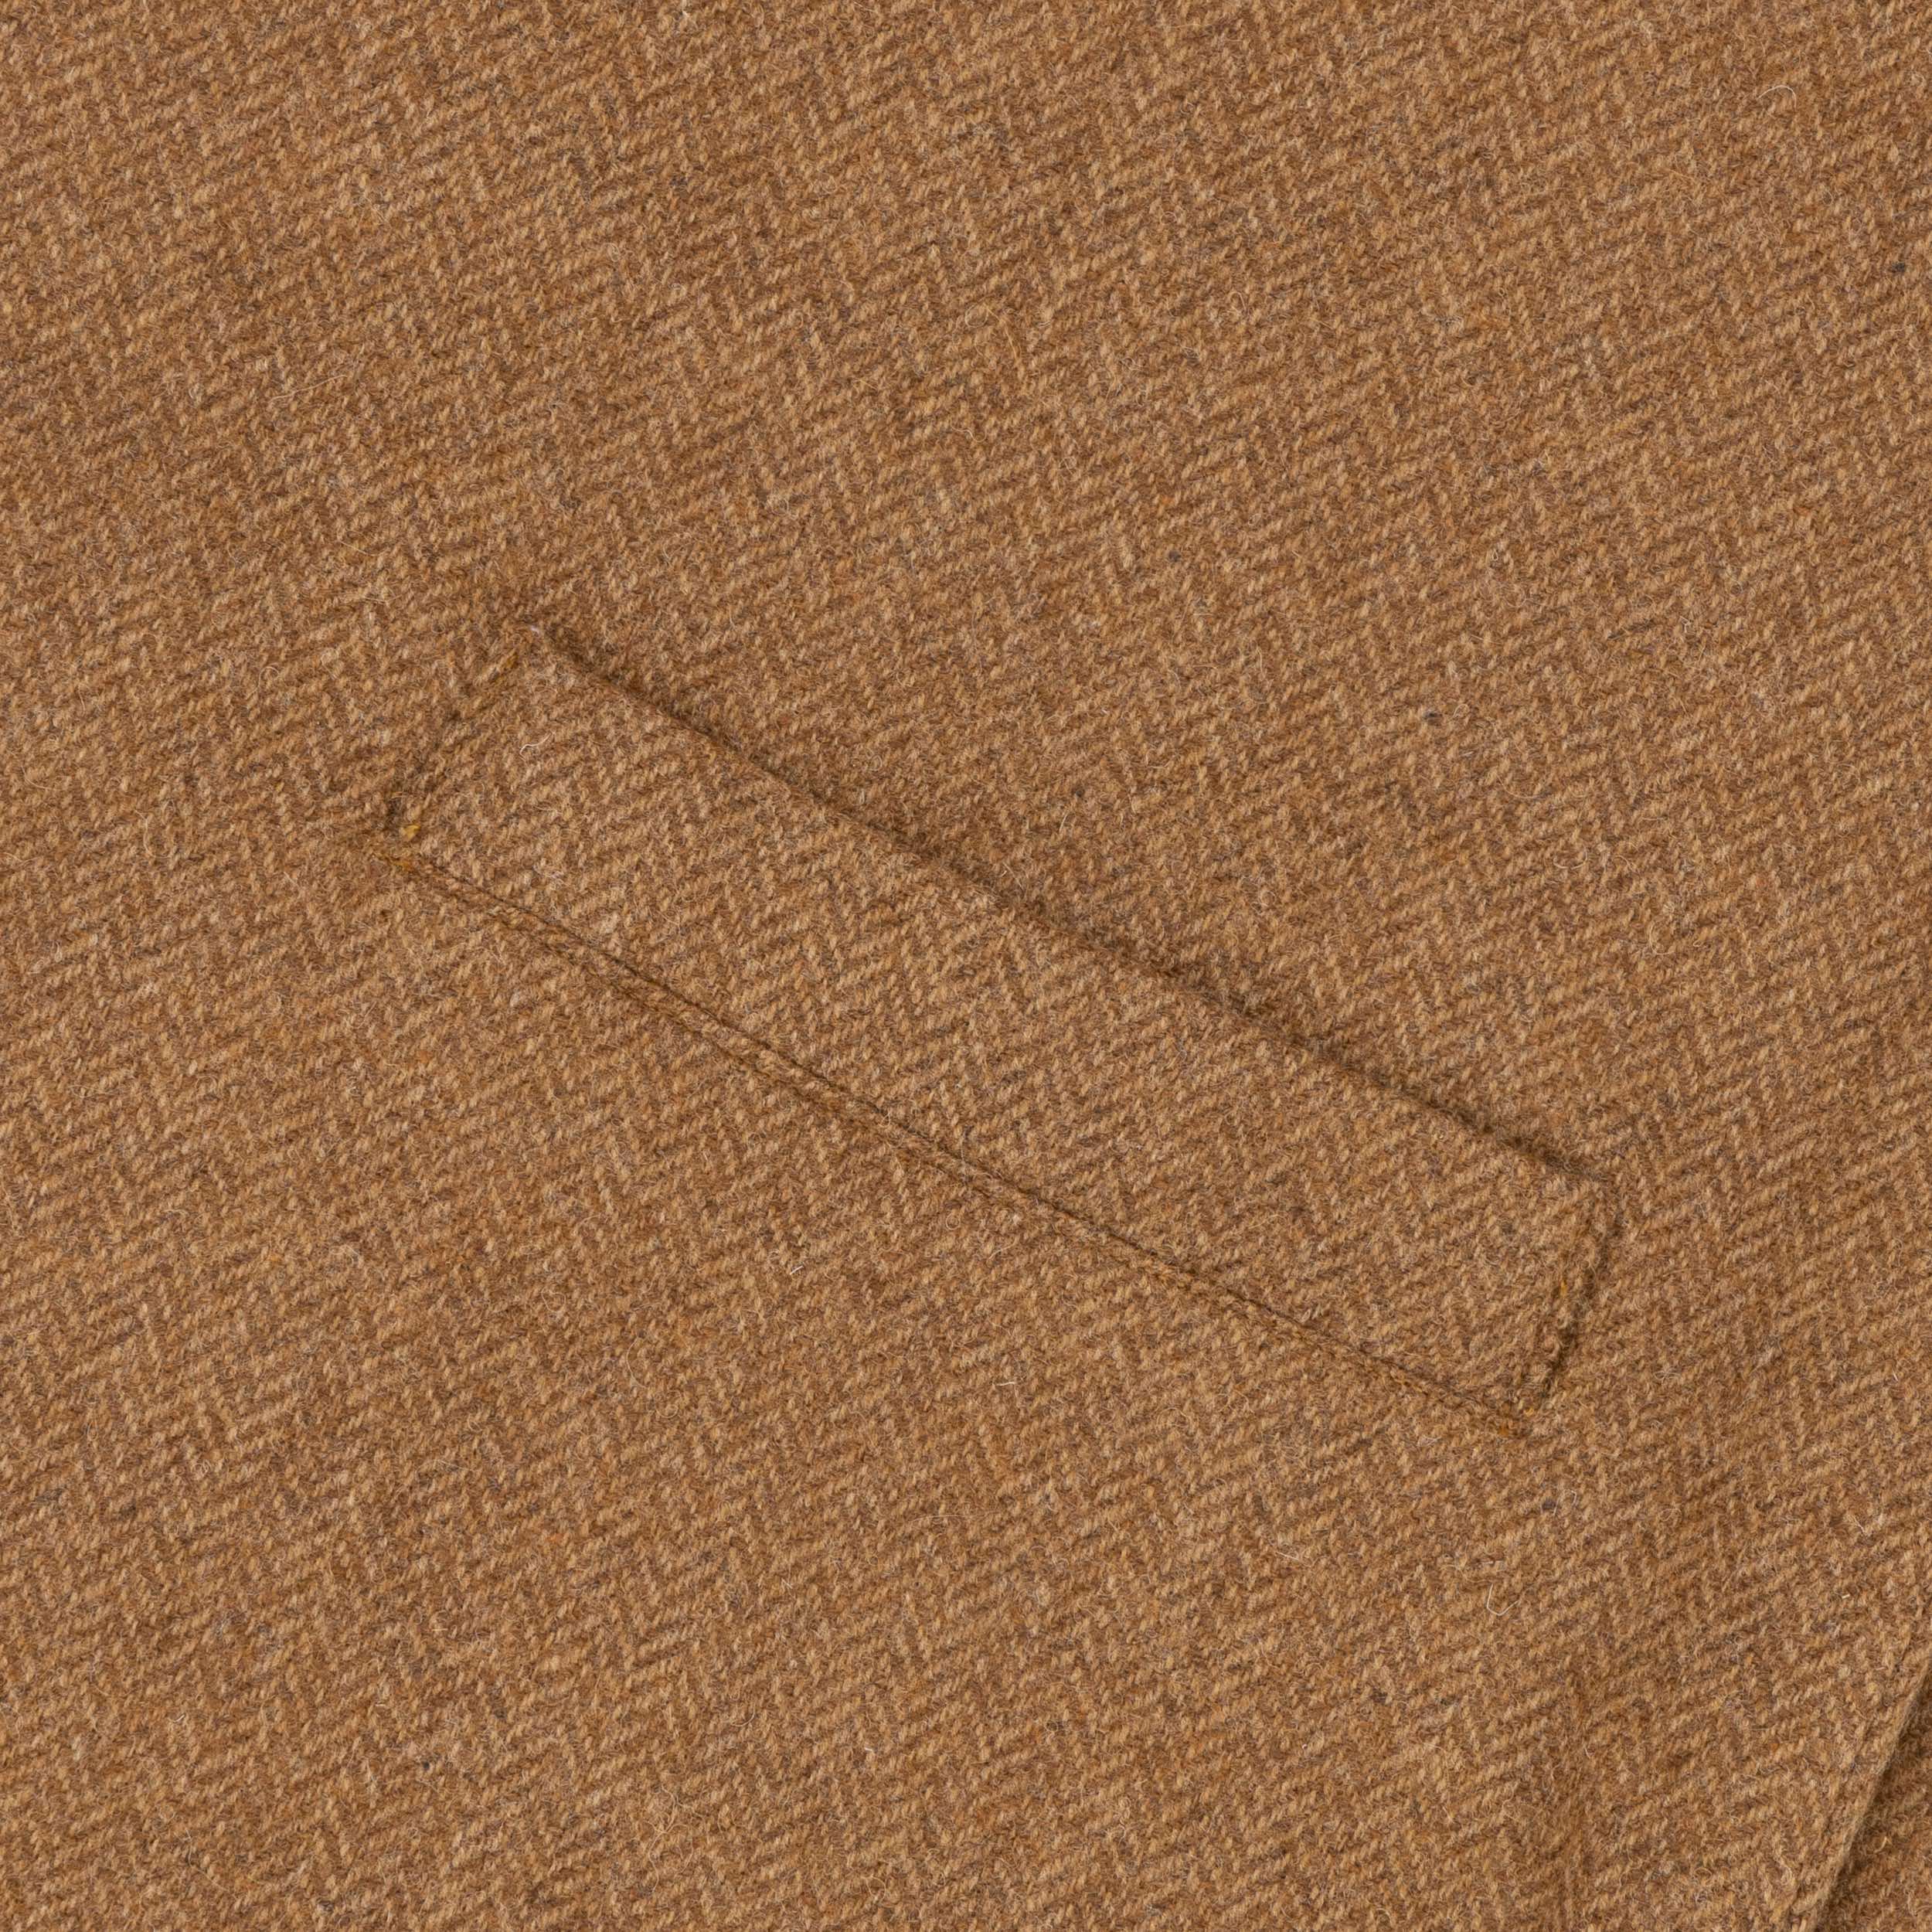 Close up of the pocket detail on the Carrier Company Men's Wool Waistcoat in Ginger Herringbone